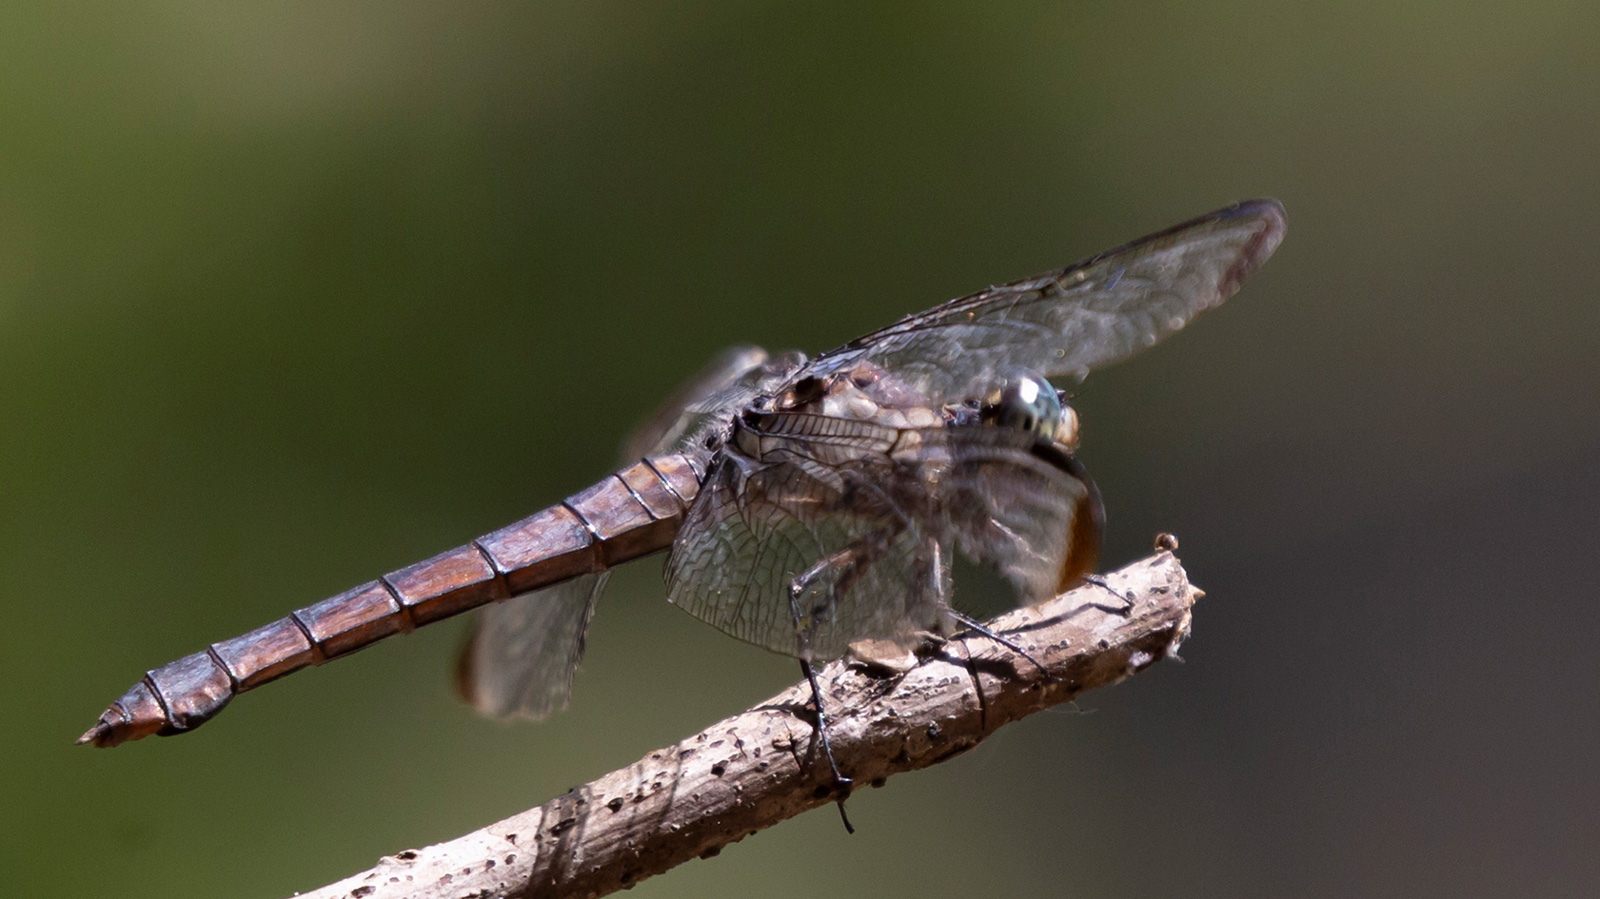 Great blue skimmer perched on a twig